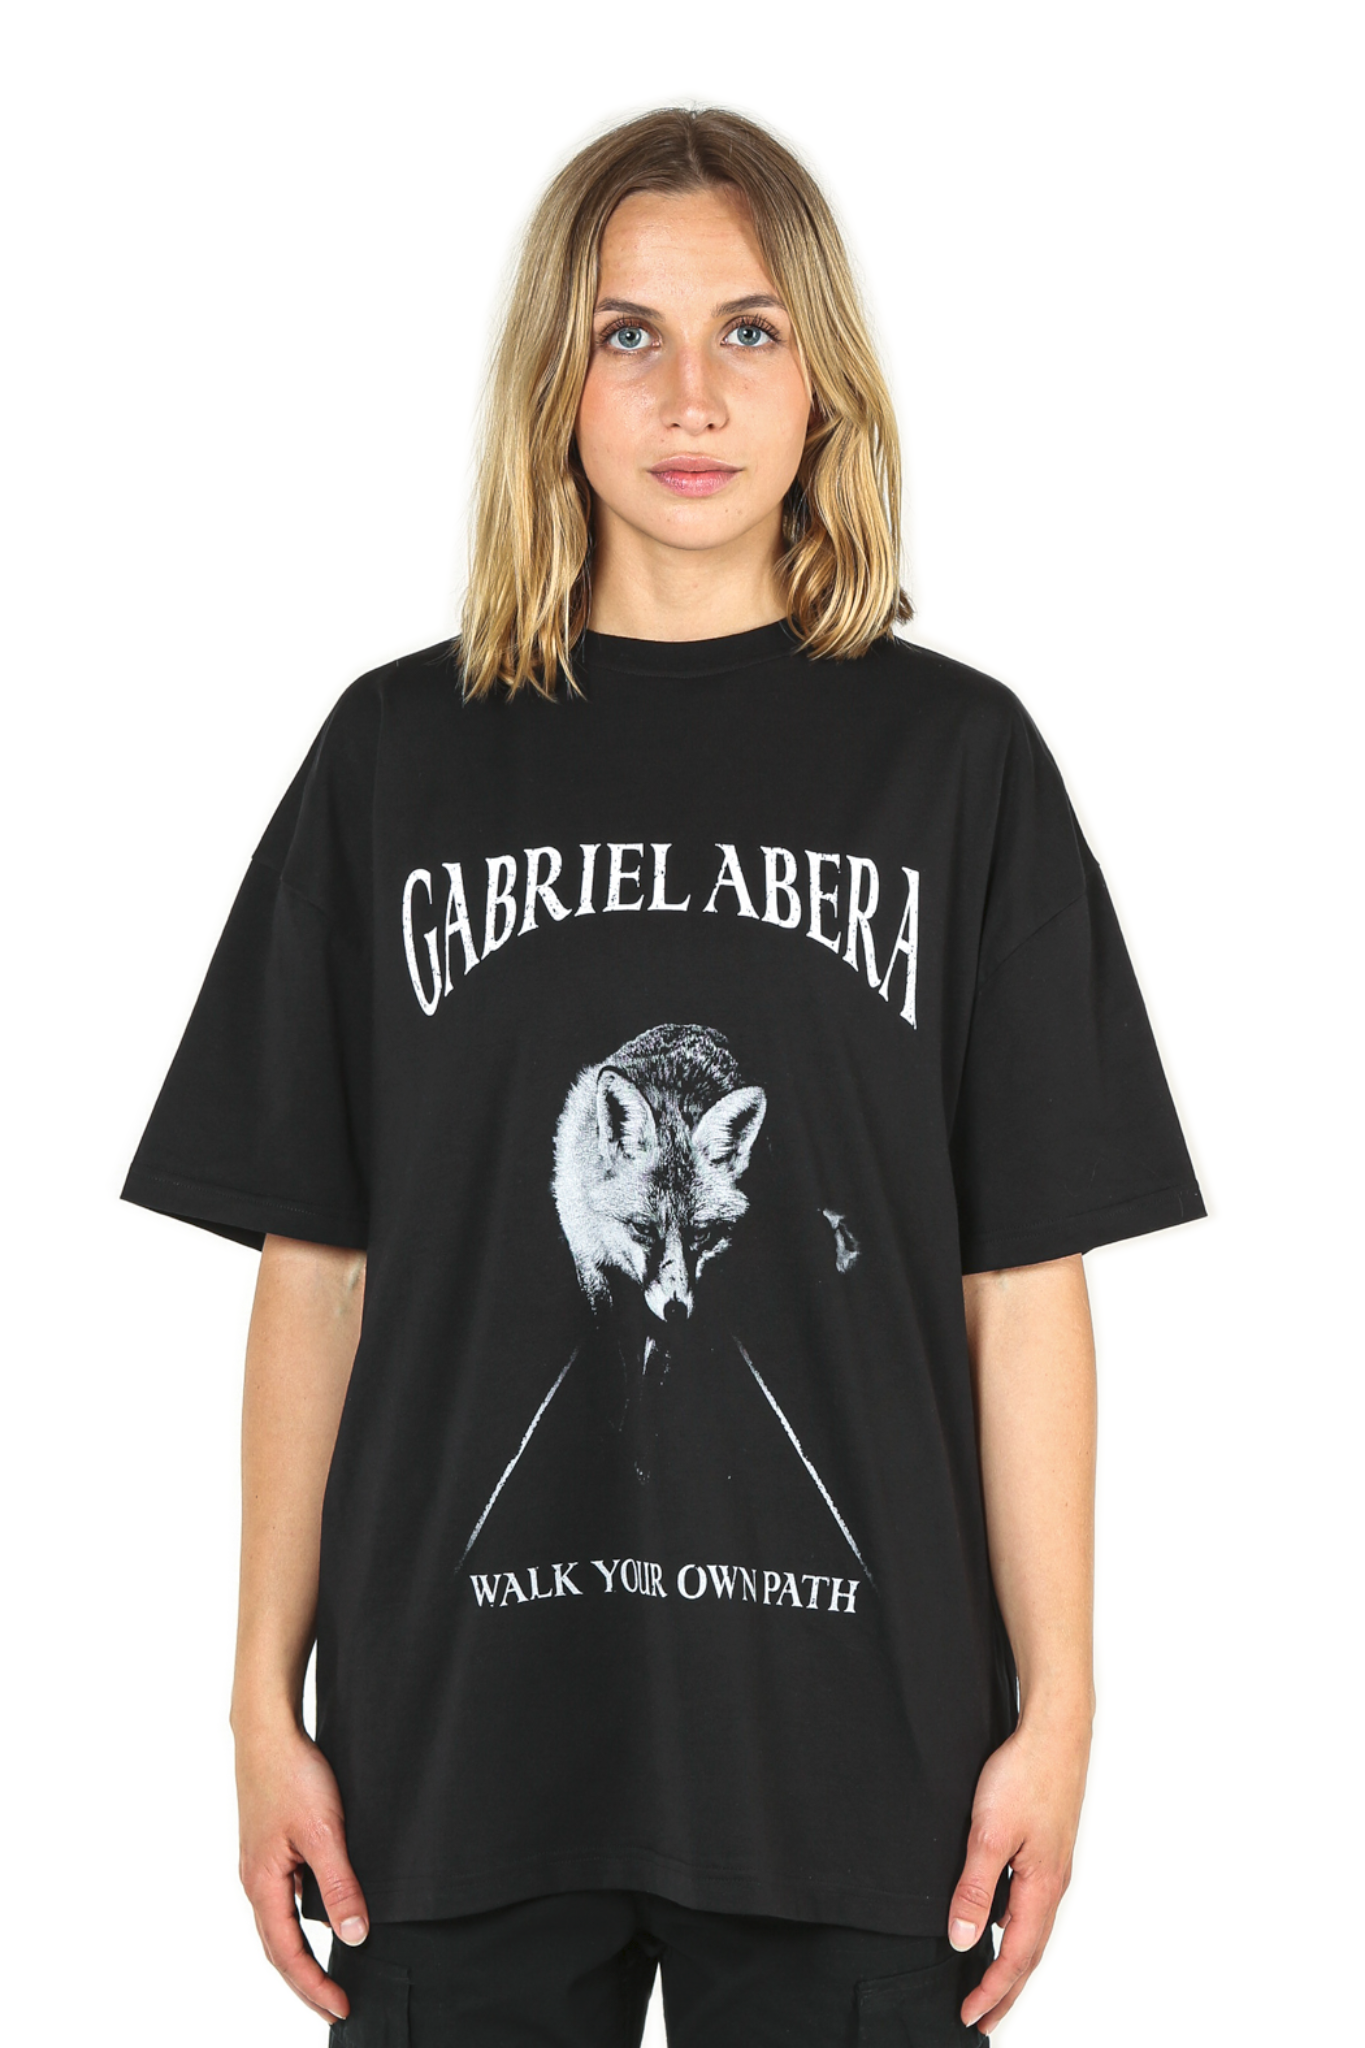 Black T-Shirt with Print on Chest, Streetwear Label, Oversize, GABRIEL ABERA, High Quality, 100% Cotton, Tee for Men and Women